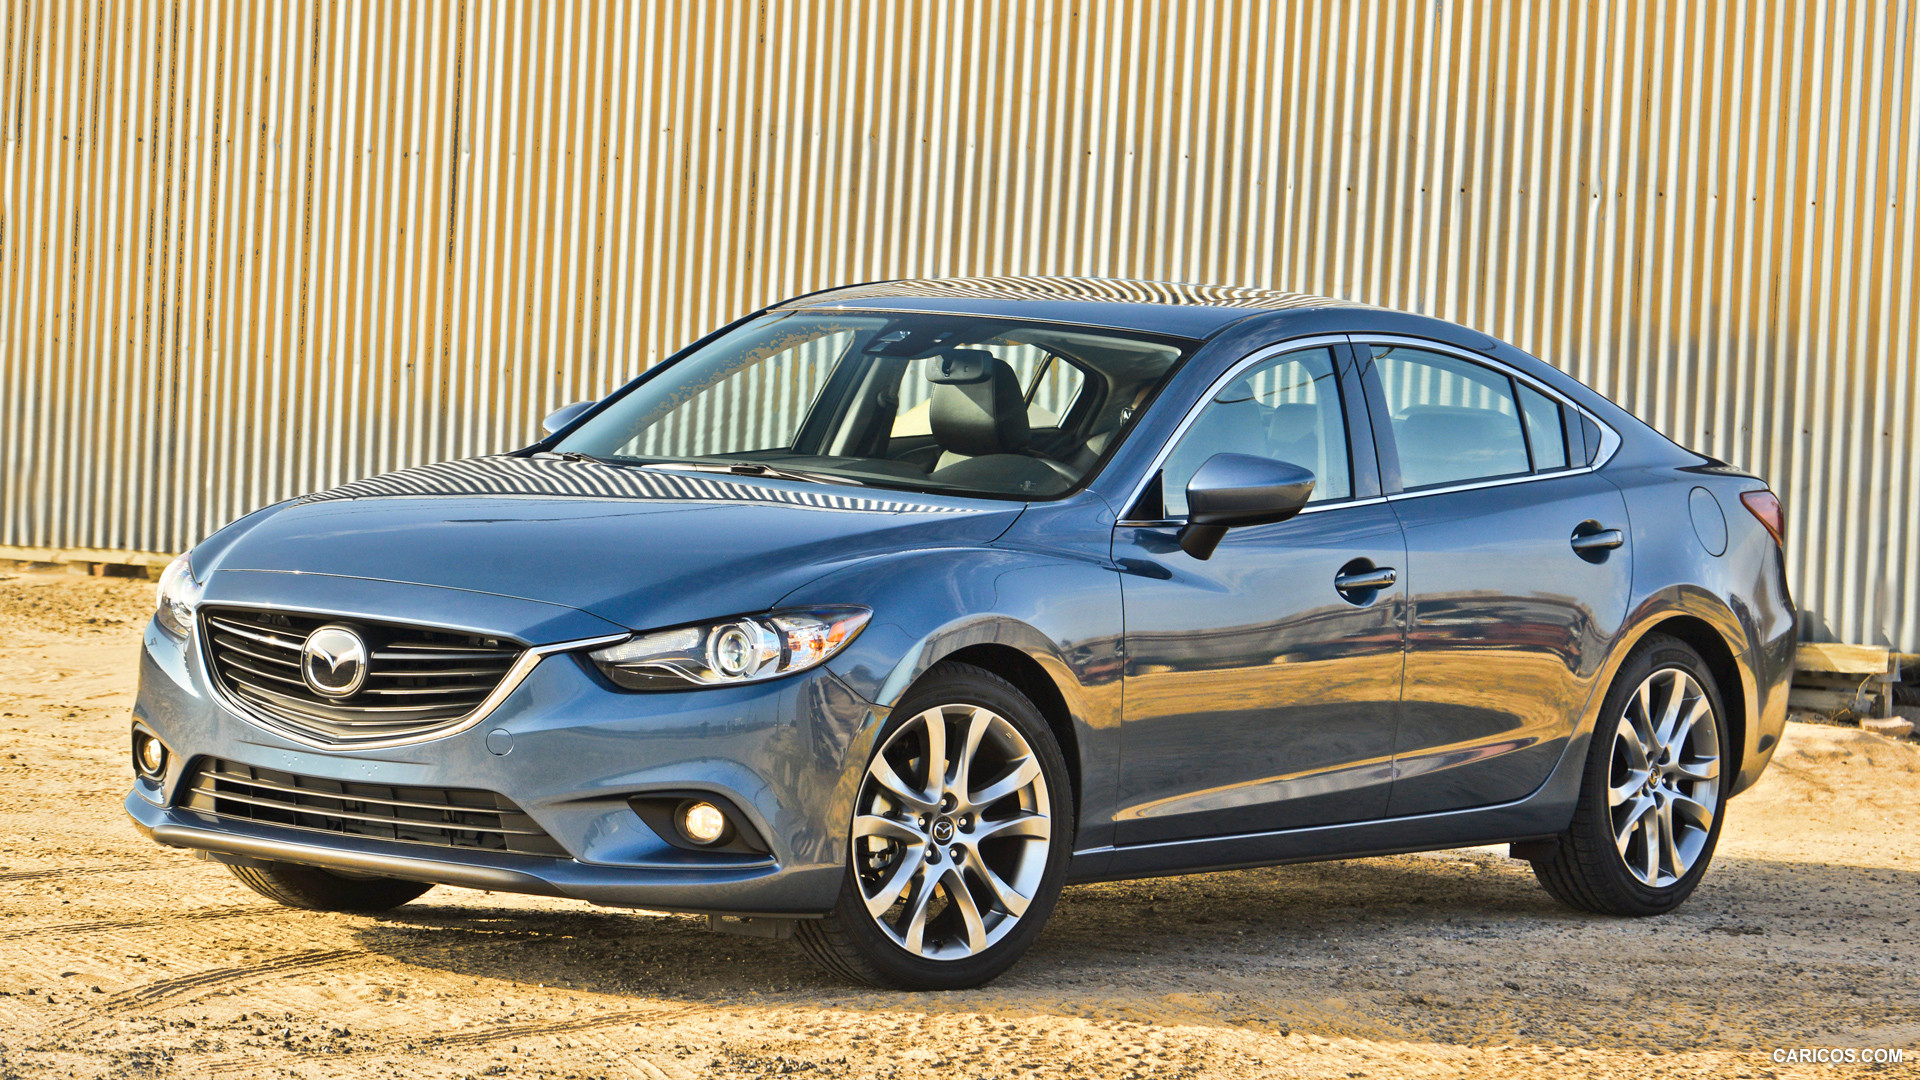 2014 Mazda6 GT - Front, #141 of 179